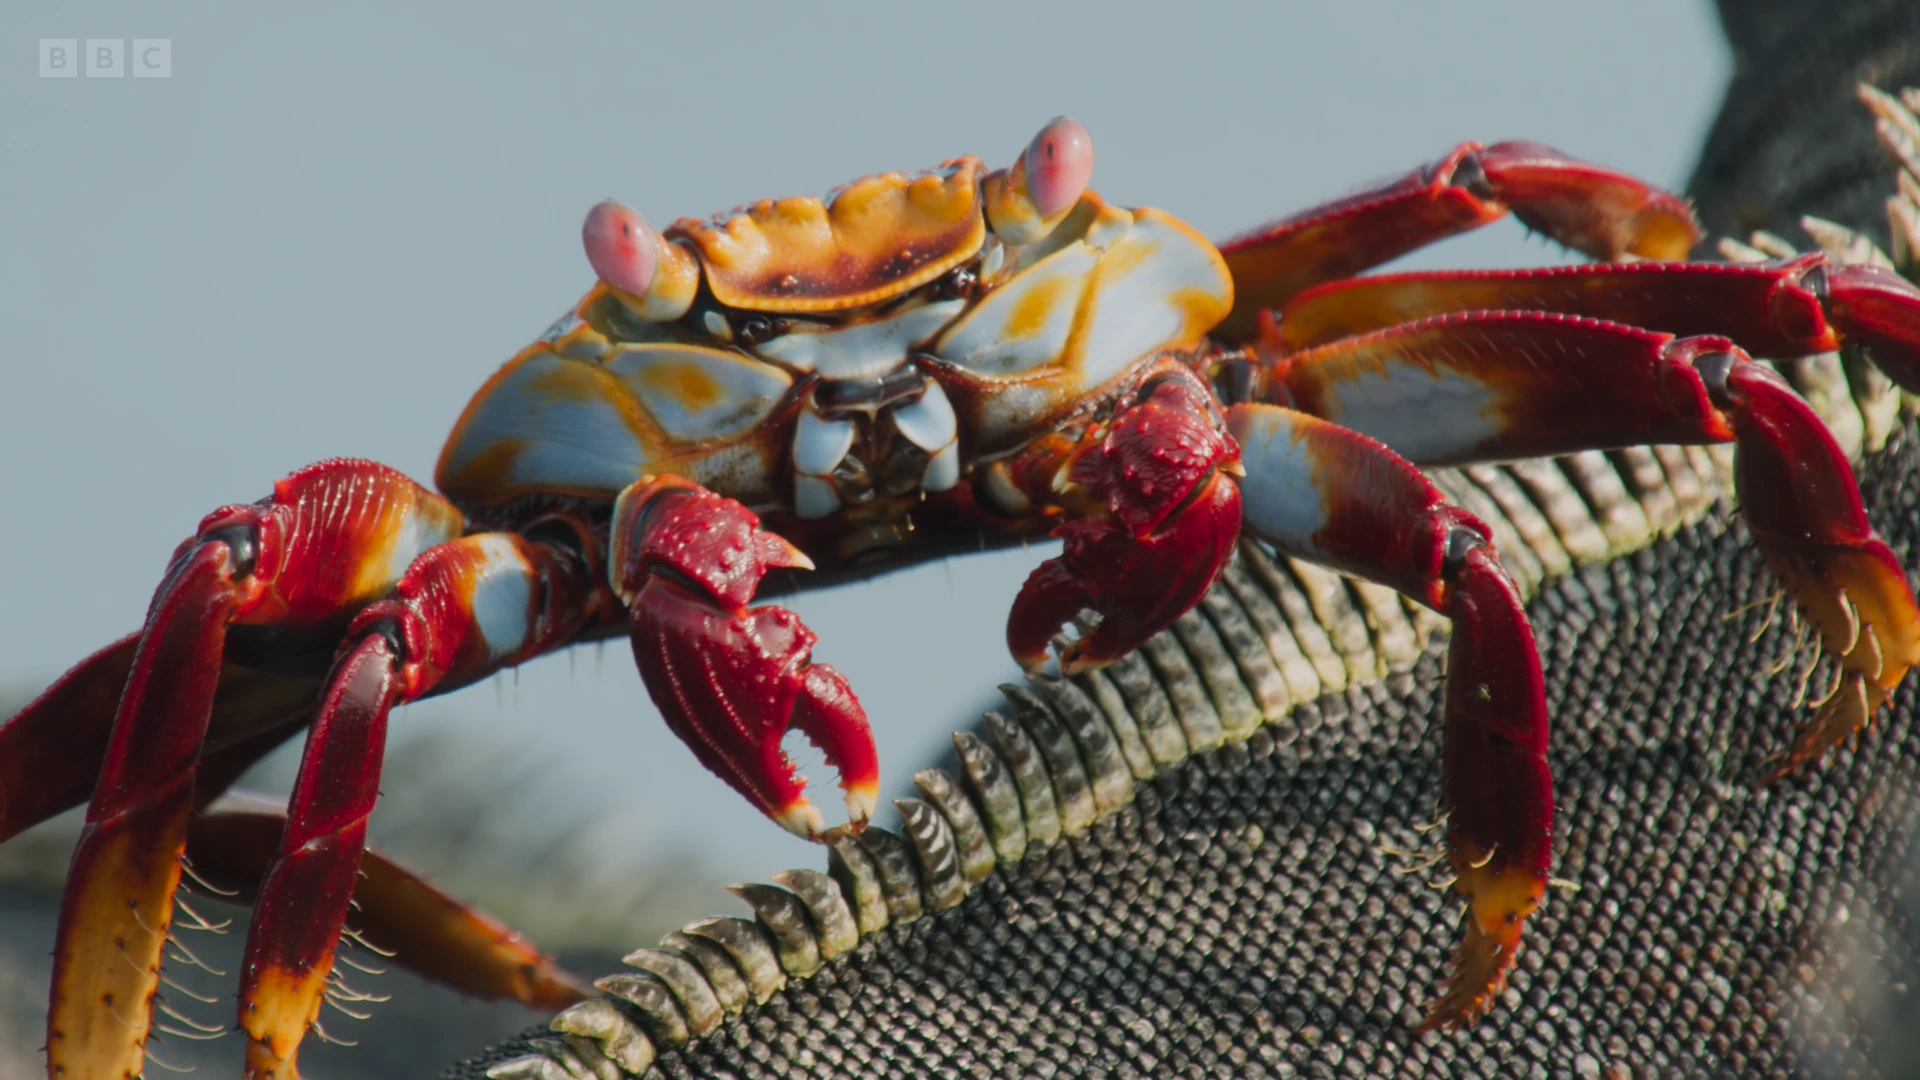 Sally Lightfoot crab (Grapsus grapsus) as shown in Planet Earth II - Islands